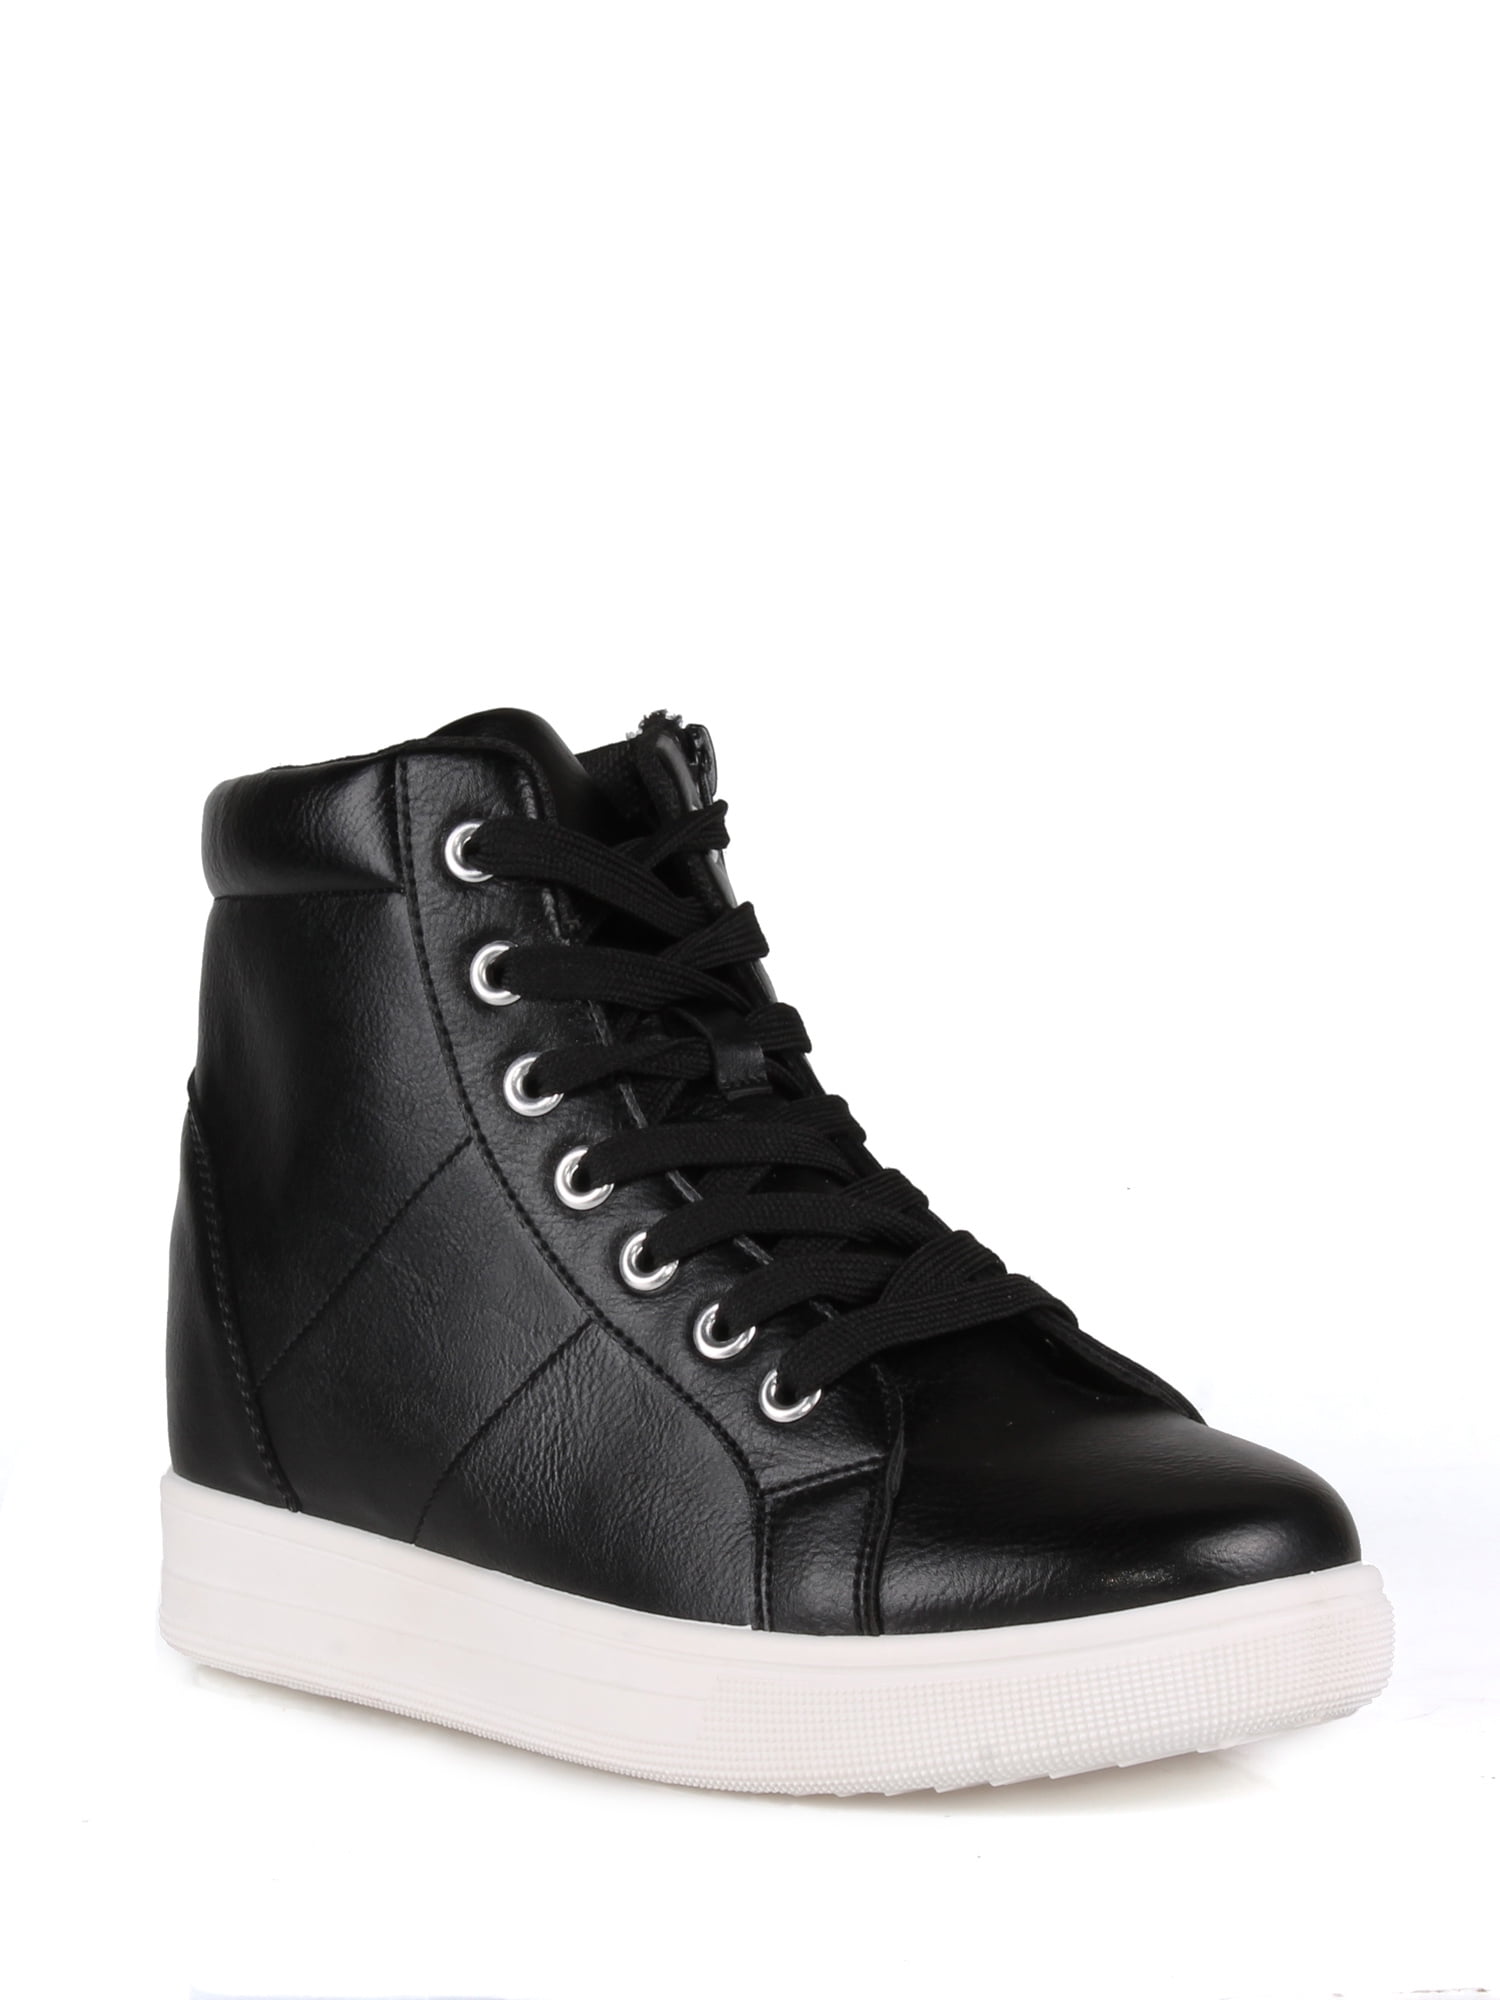 Instant Lace up Wedge Sneakers in Black - Walmart.com